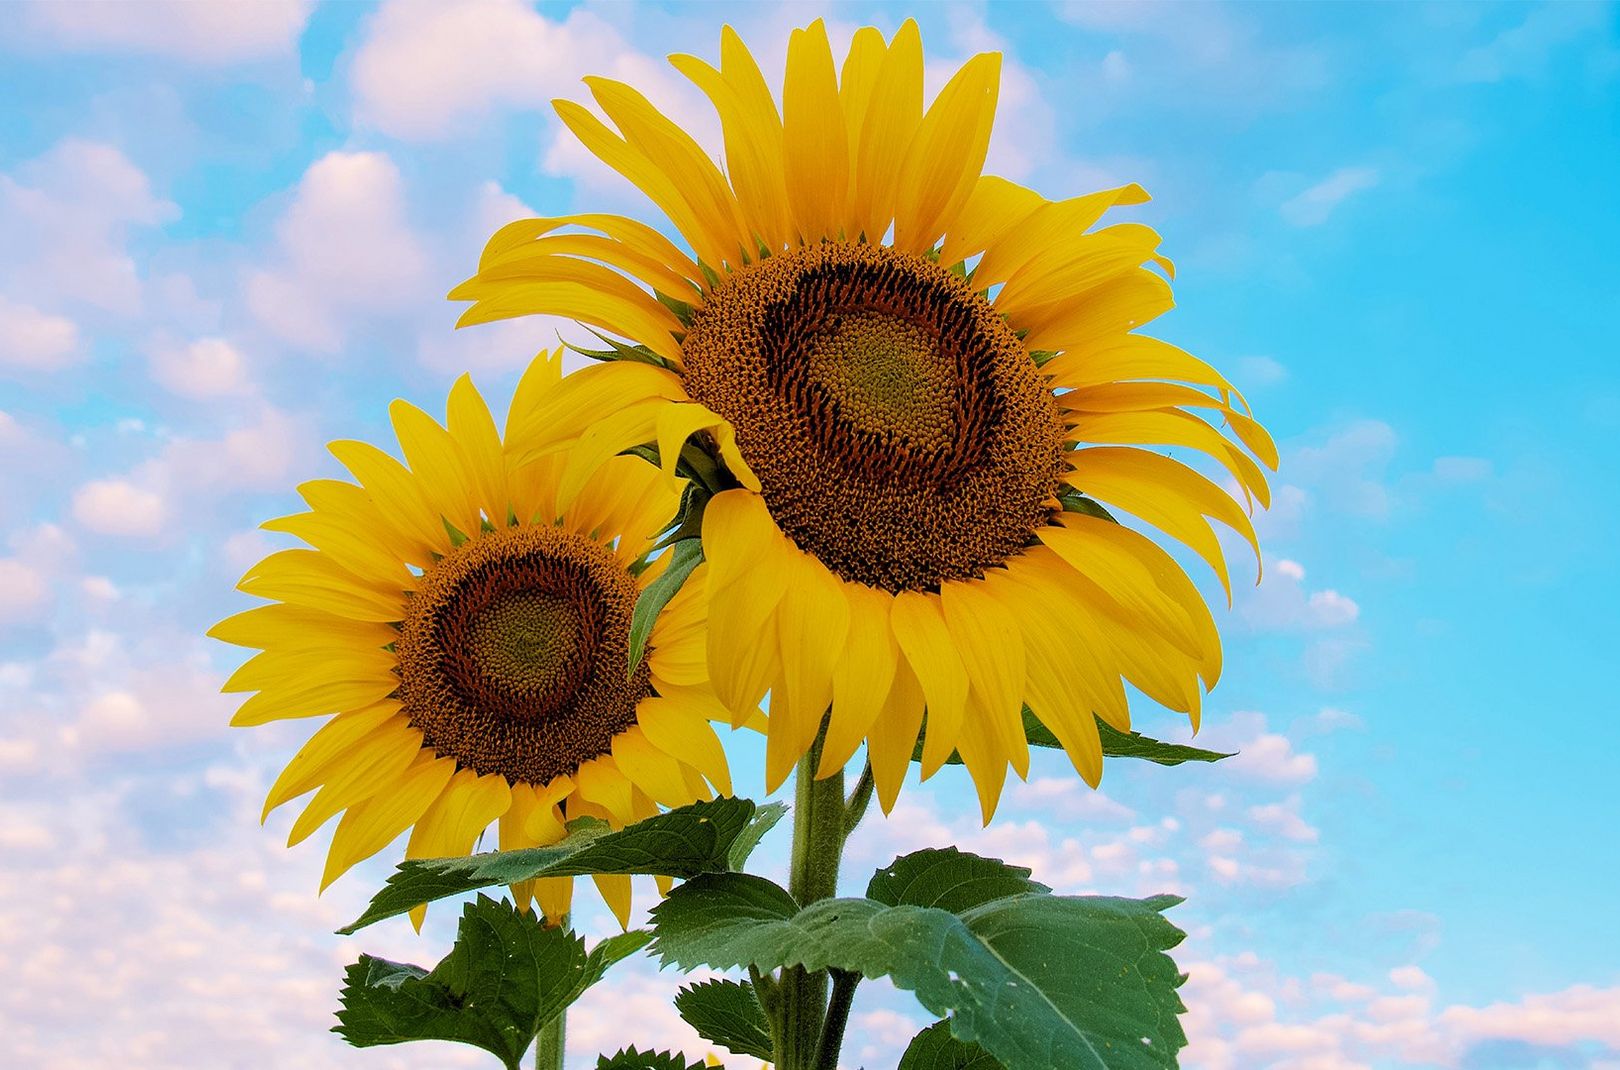 A picture of sunflowers